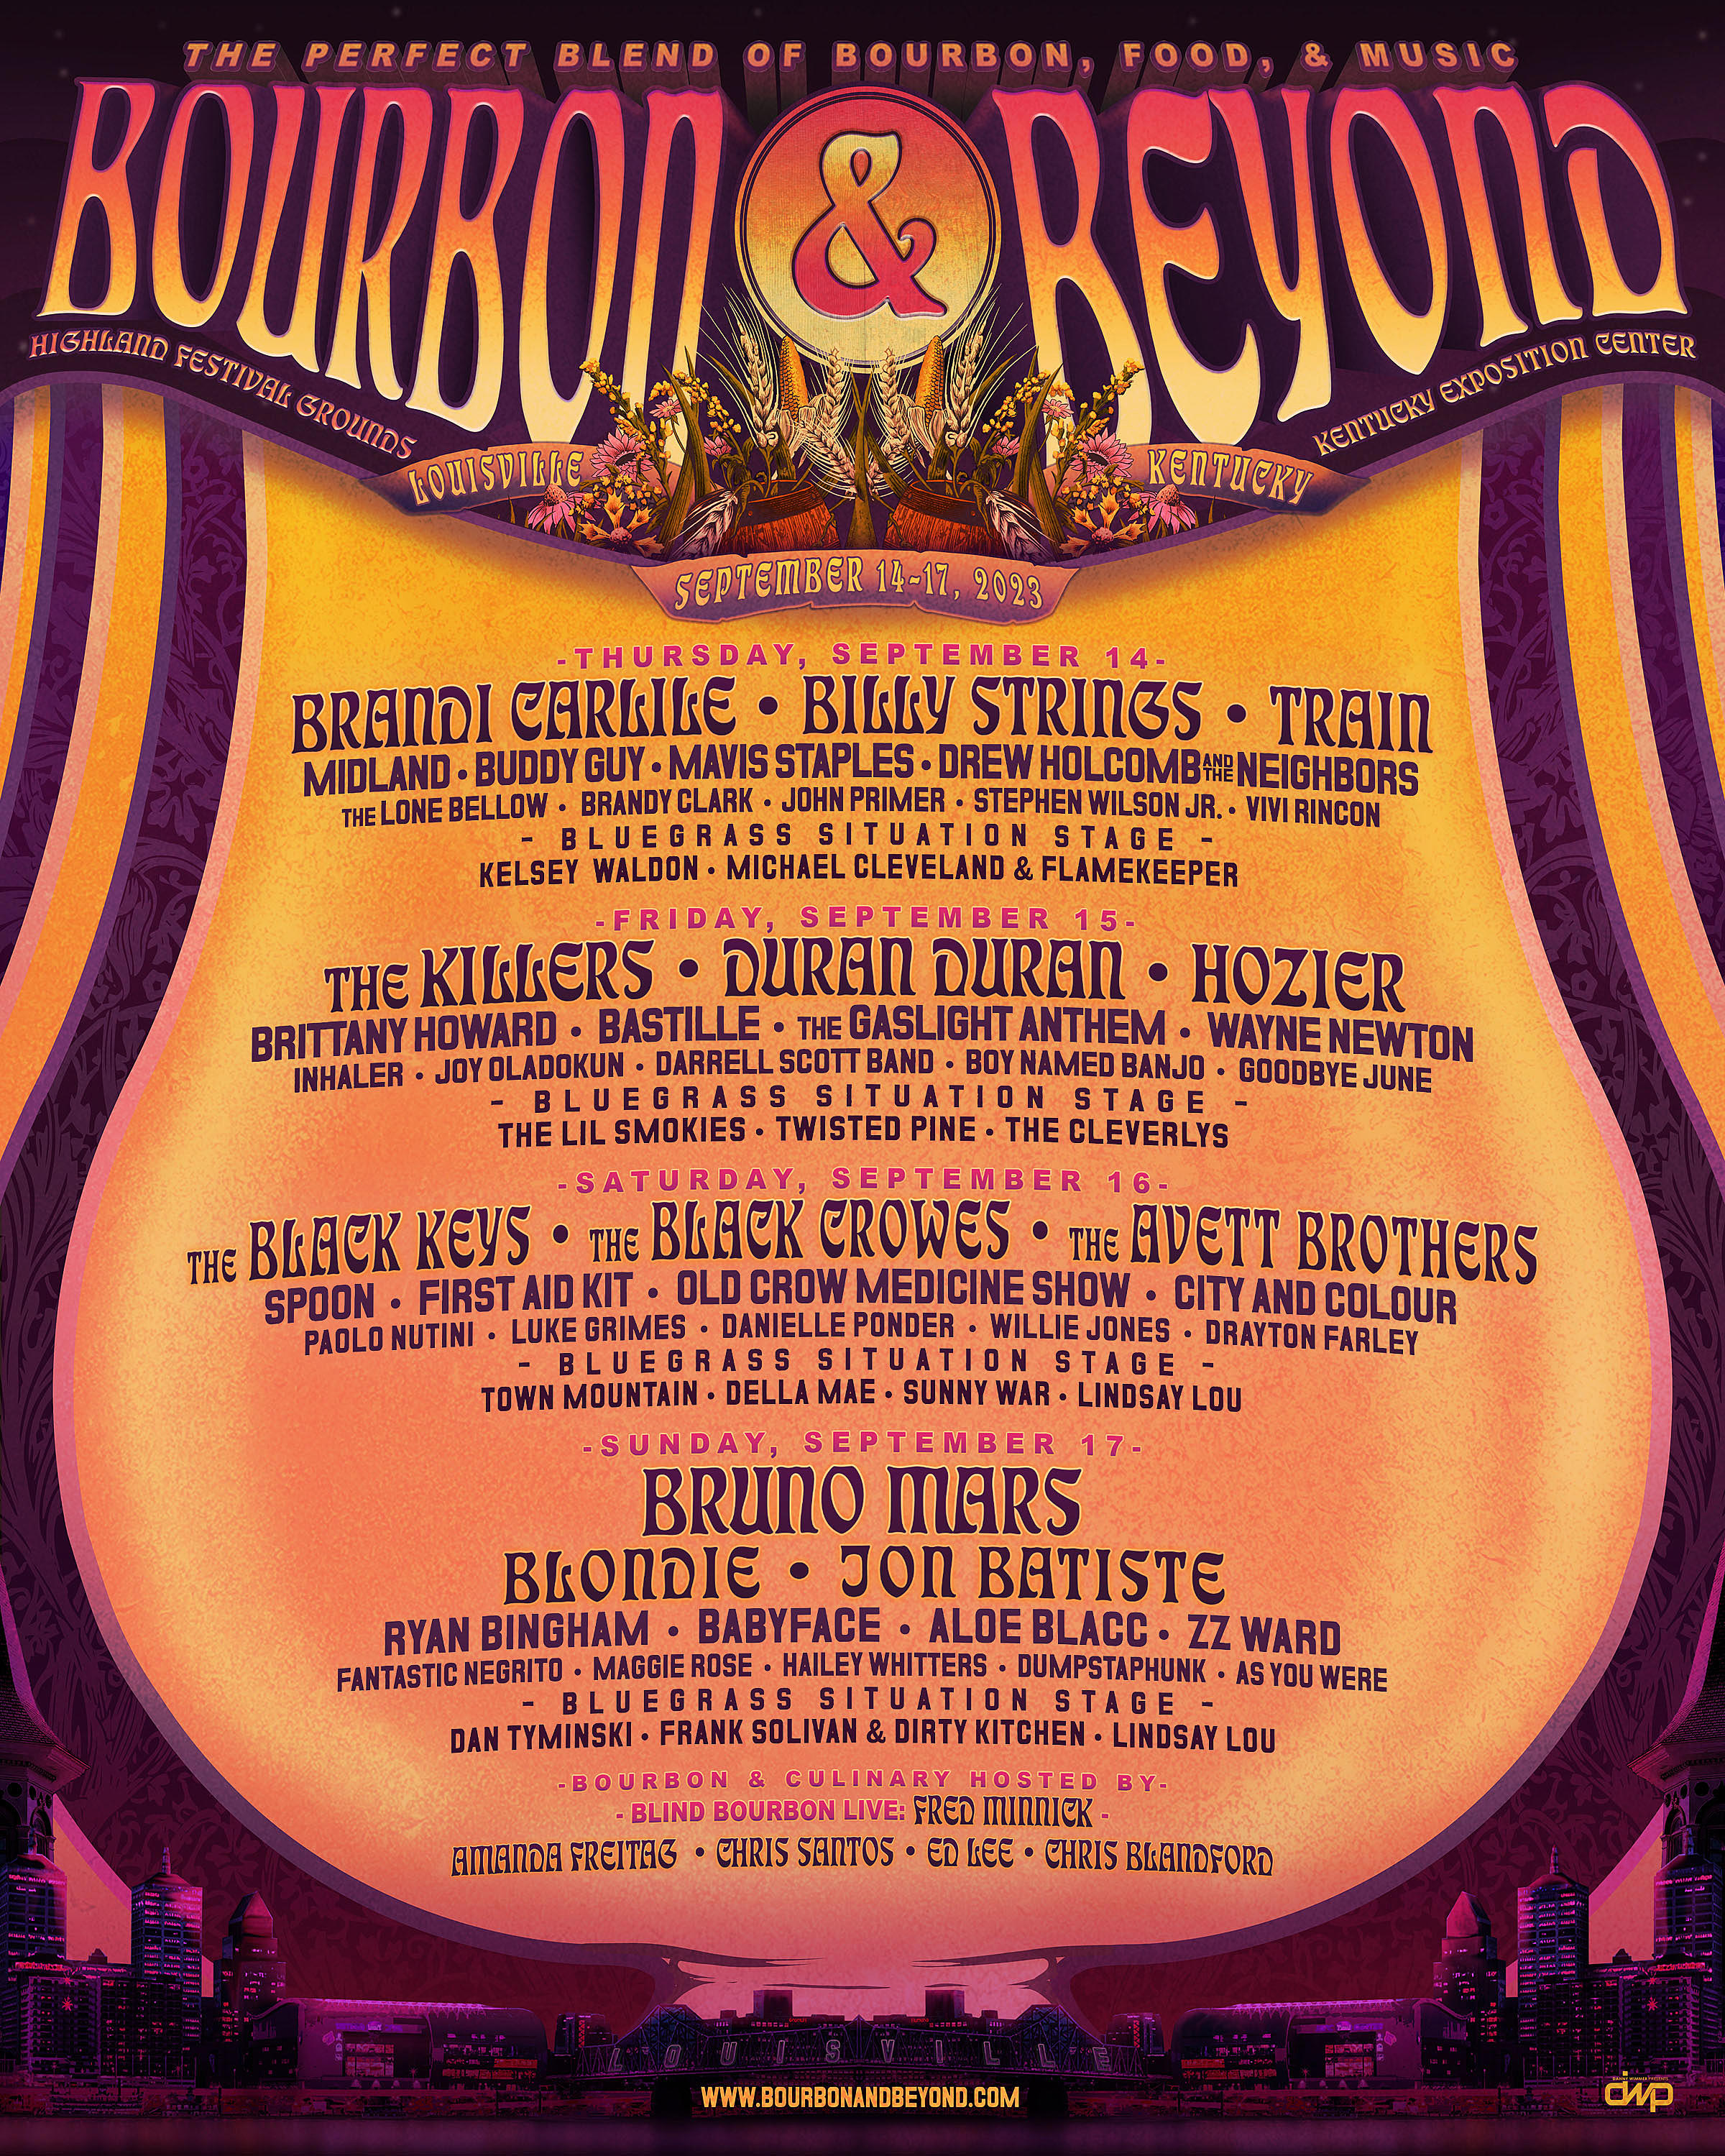 ON SALE 2023 Bourbon & Beyond Music Lineup includes Bruno Mars, The